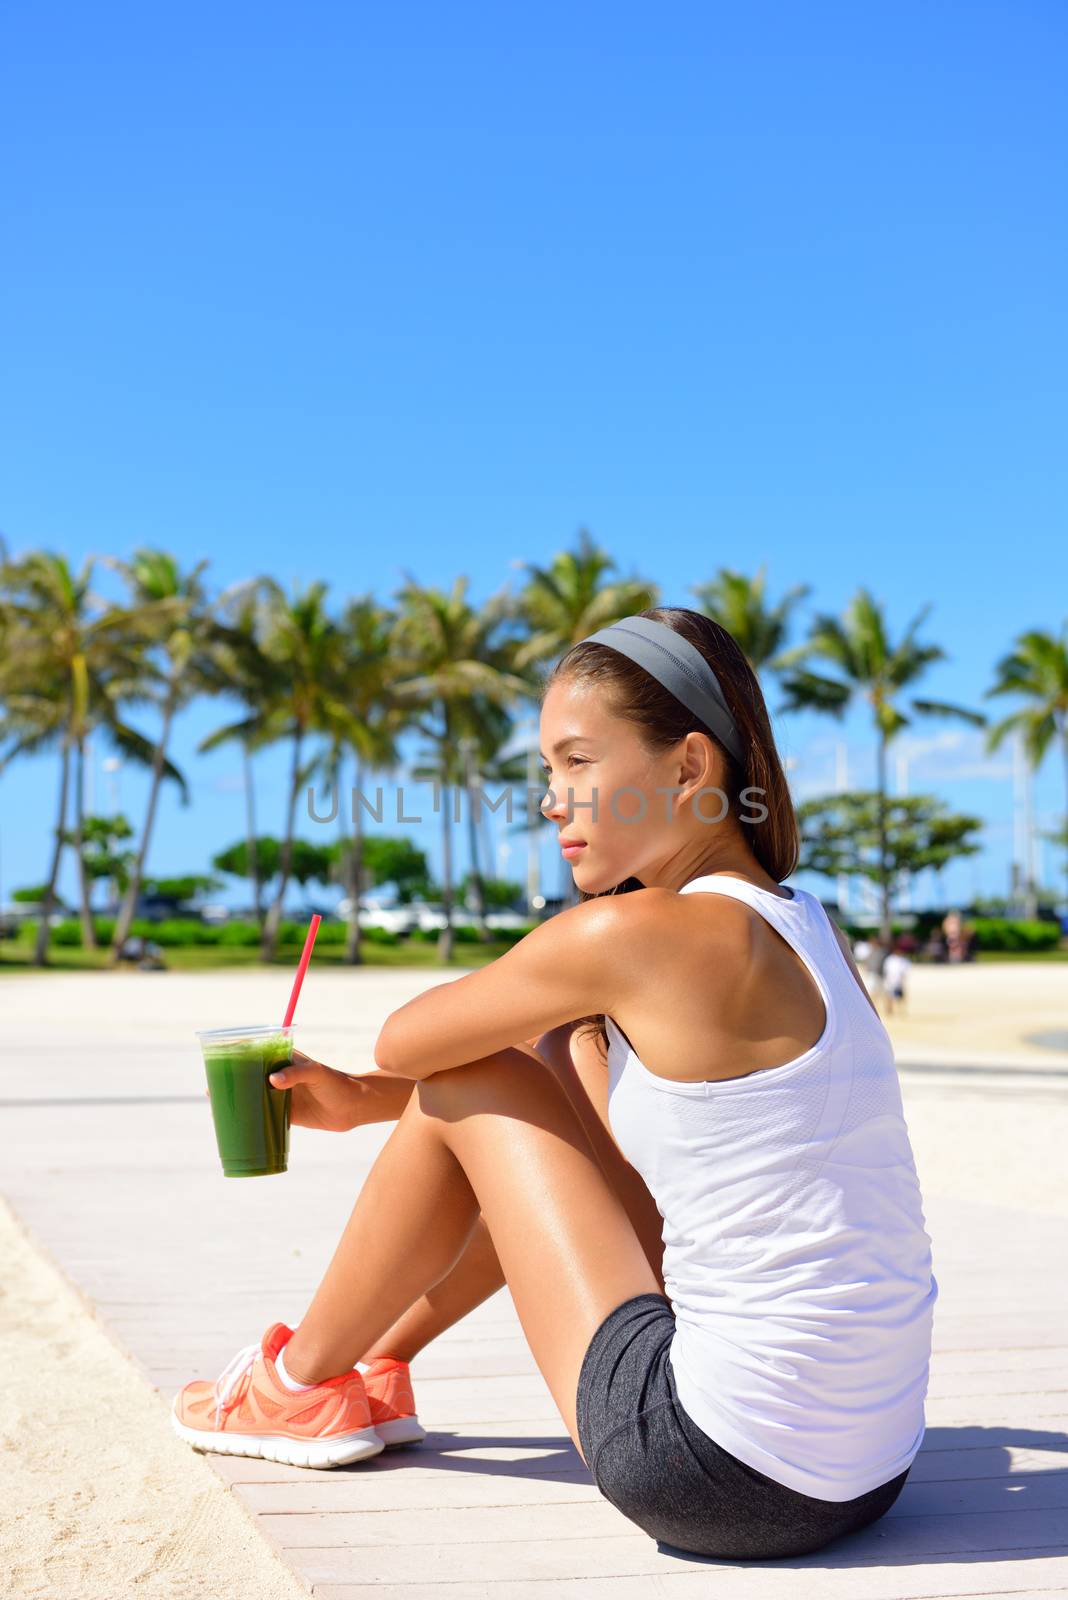 Exercise woman runner drinking green vegetable smoothie resting and relaxing after running. Fitness and healthy lifestyle concept with multiracial Asian Caucasian female model.